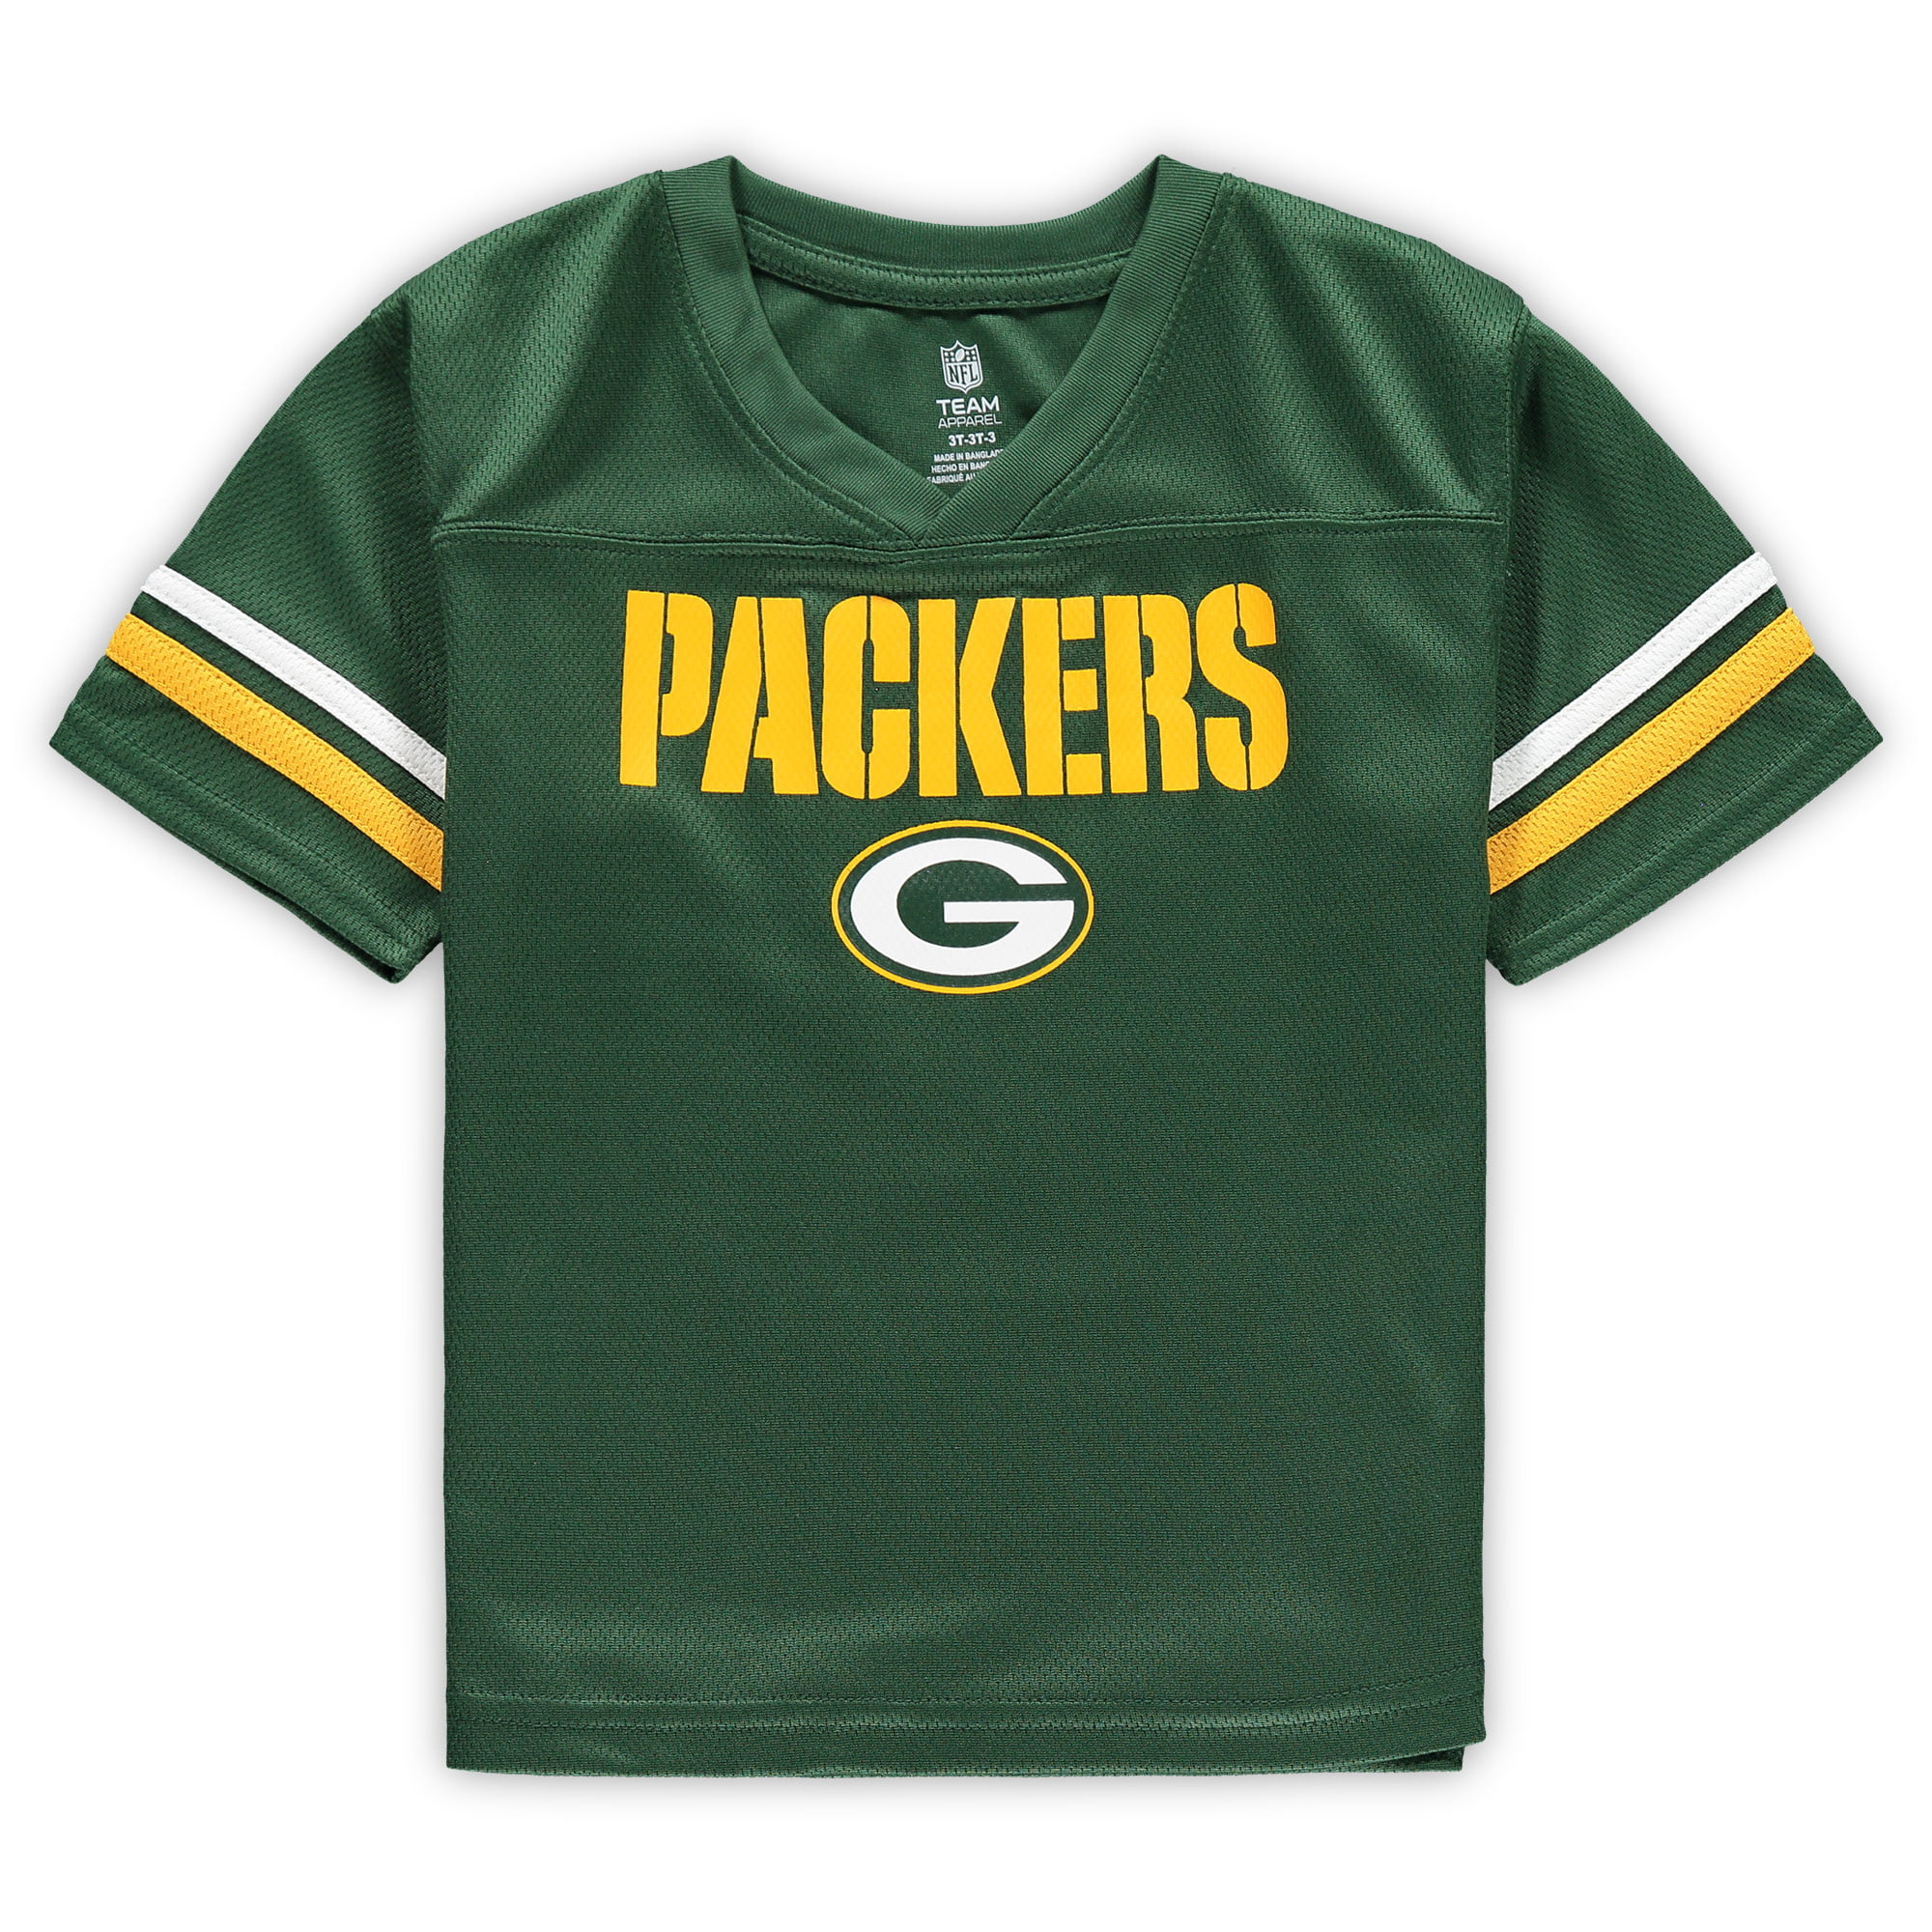 3t packers jersey